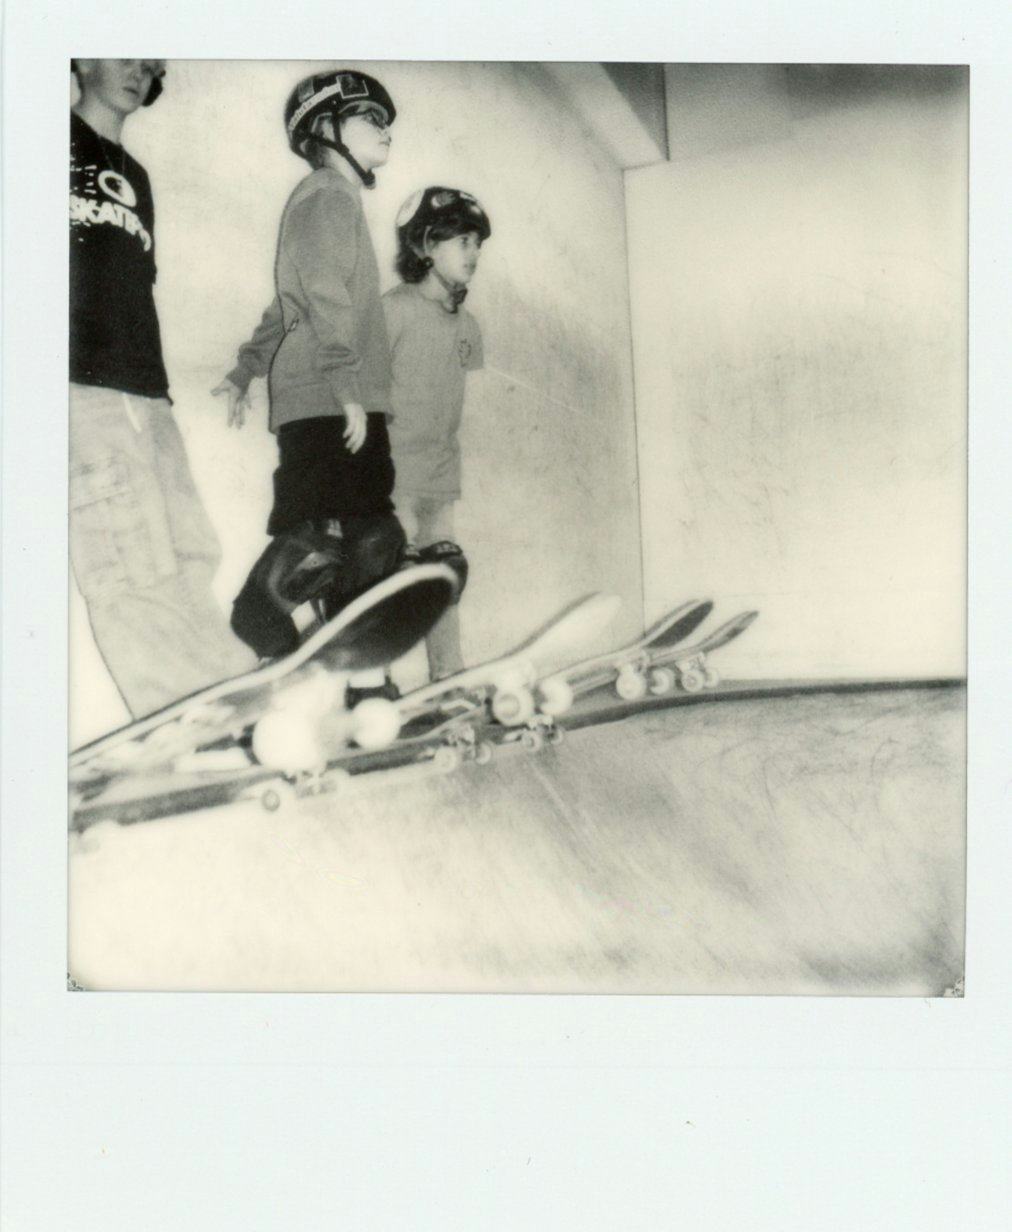 Polaroid BW of three skaters ready to jump off the ramp